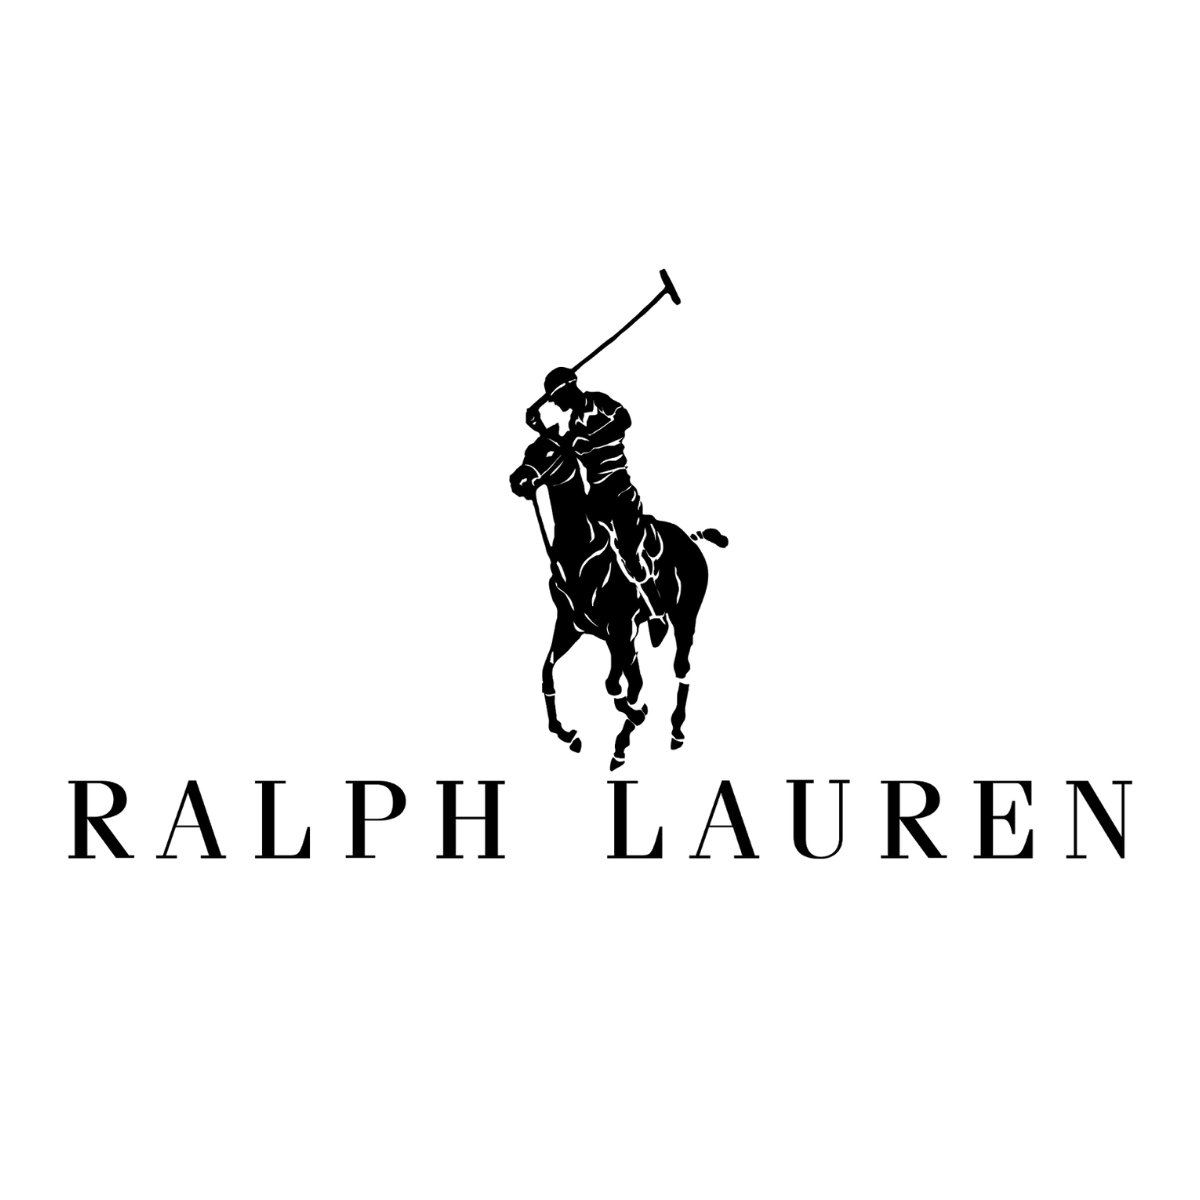 Ralph lauren manage their stocks thanks to our solutions : corsoshield wall